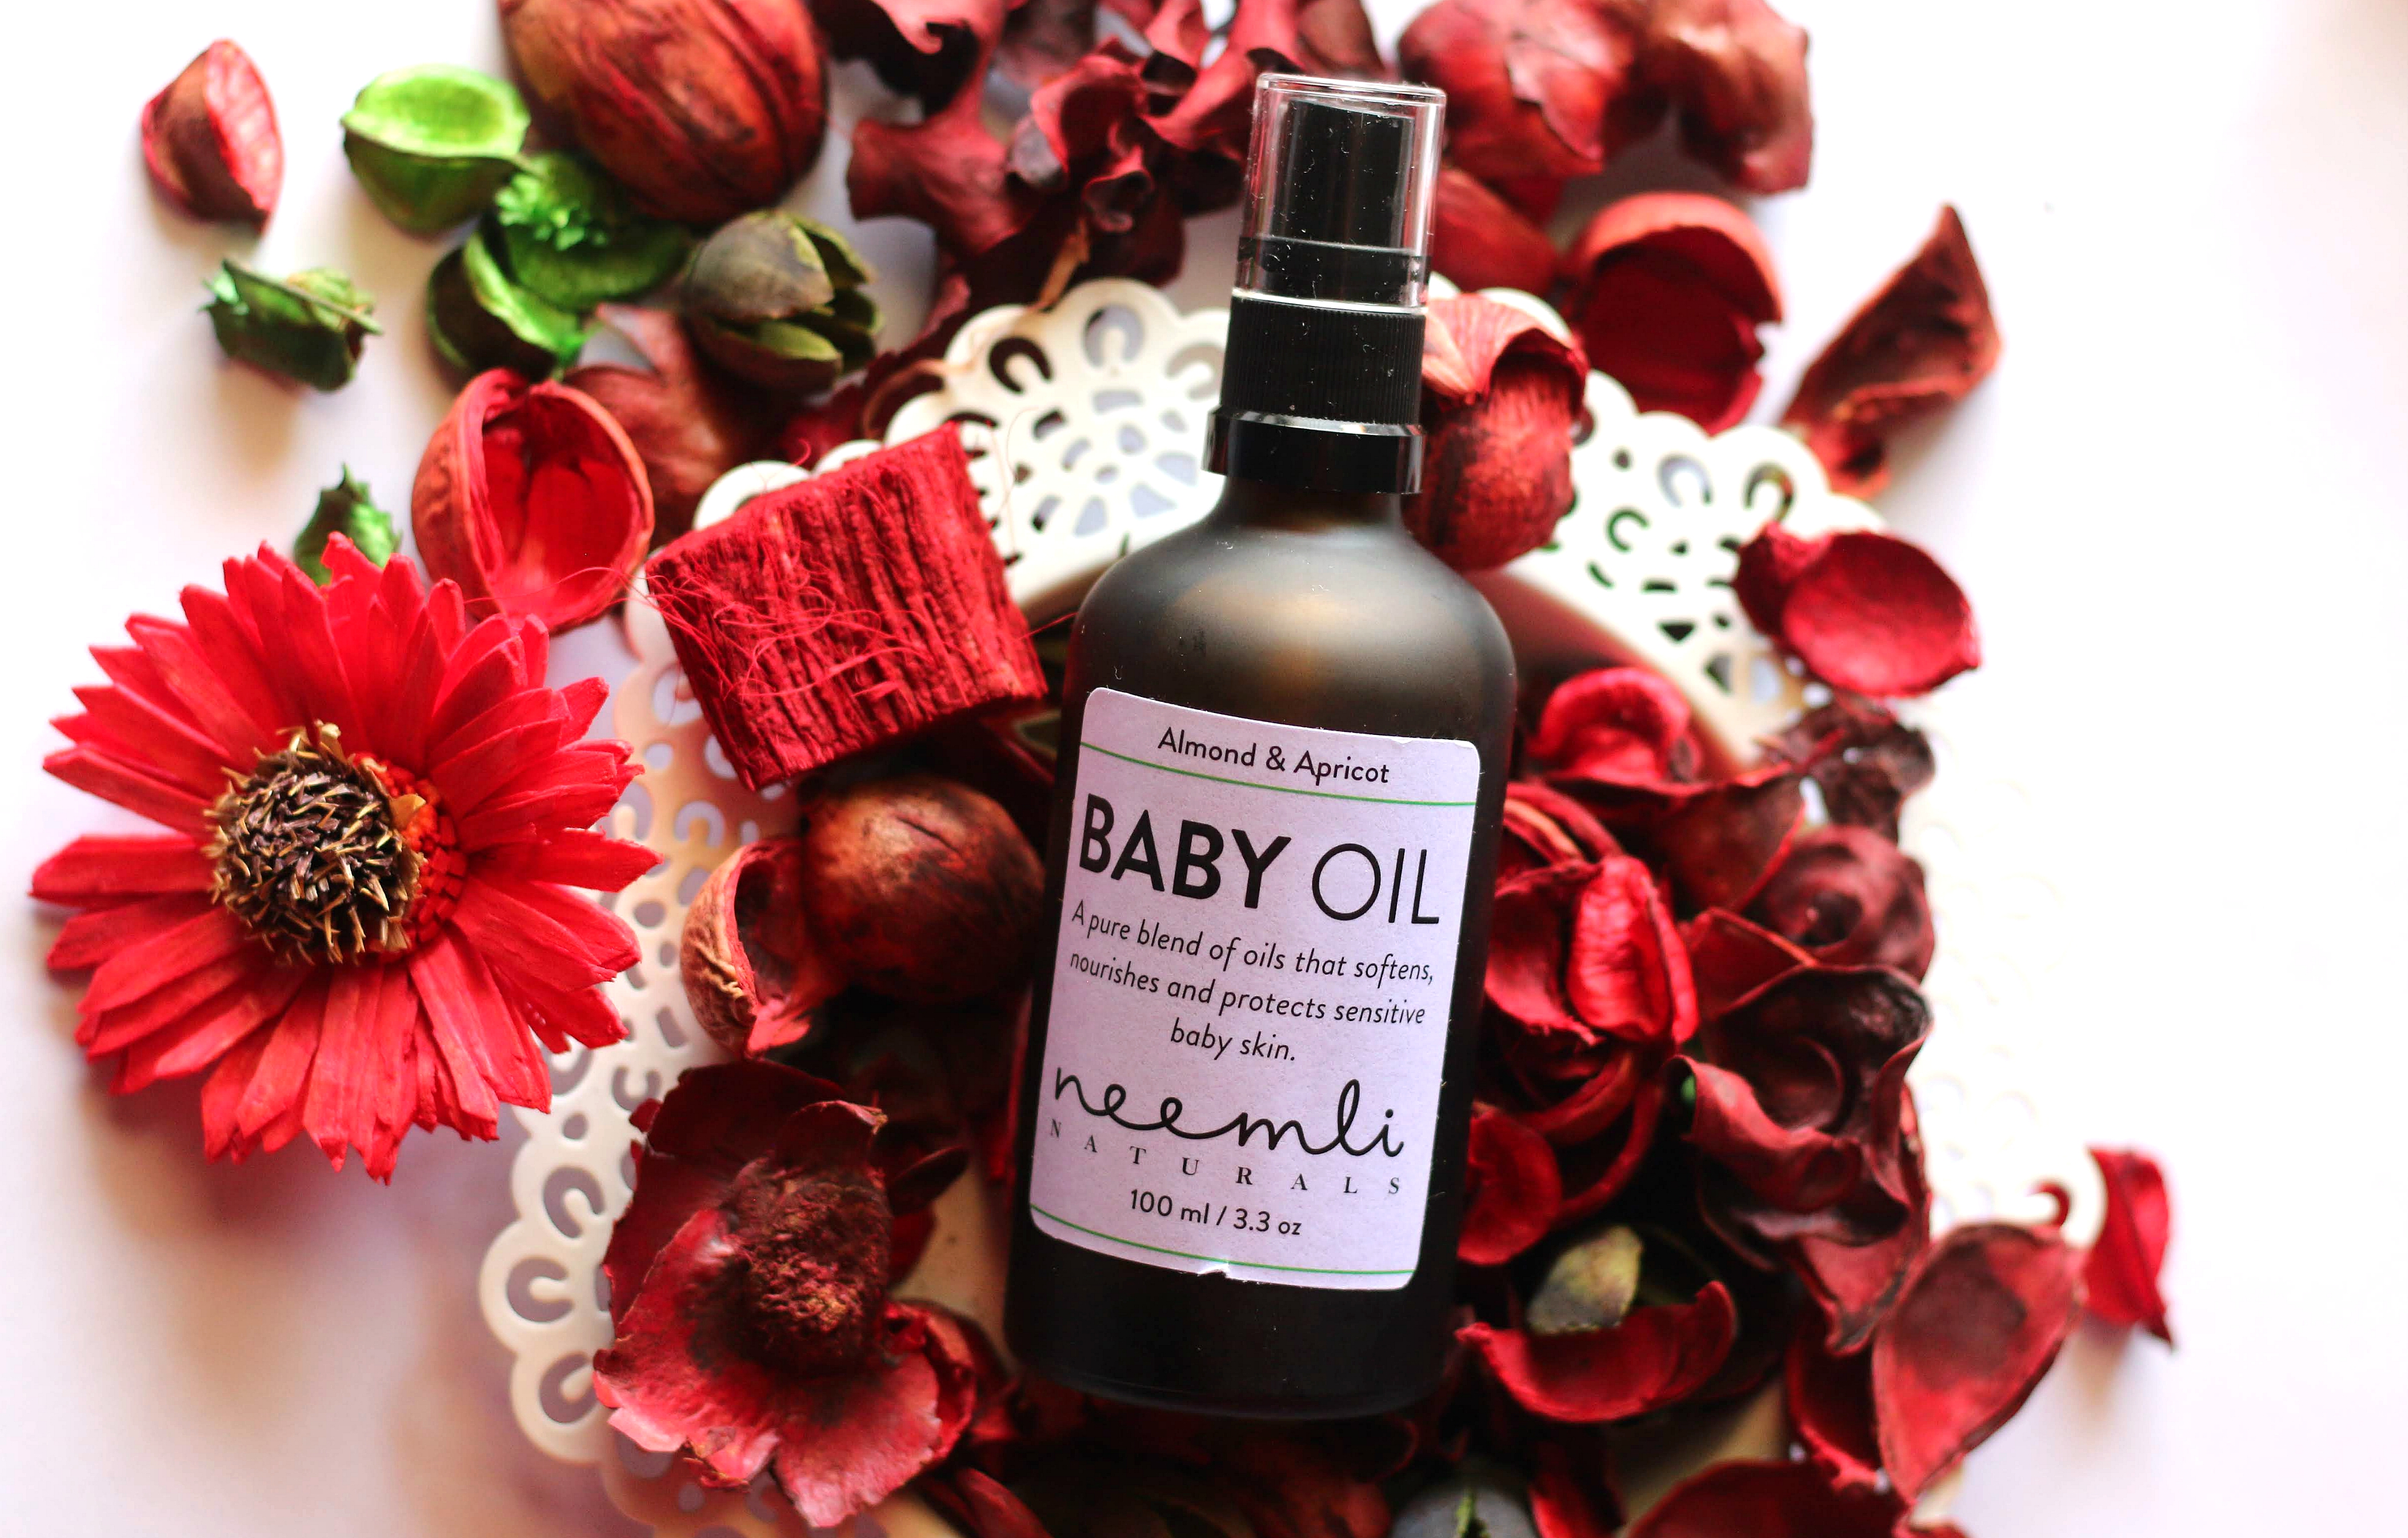 baby oil, baby hair oil, baby massage oil, baby body massage oil, neemli naturals almond & apricot baby oil, best massage oil in india, neemli products review, neemli baby oil, neemli almond and apricot baby oil,best massage oils for your baby, baby massage oils online, best baby massage oil brand in india,baby massage oil for fairness,
best baby massage oil for strong bones, best baby massage oil for strong bones in india